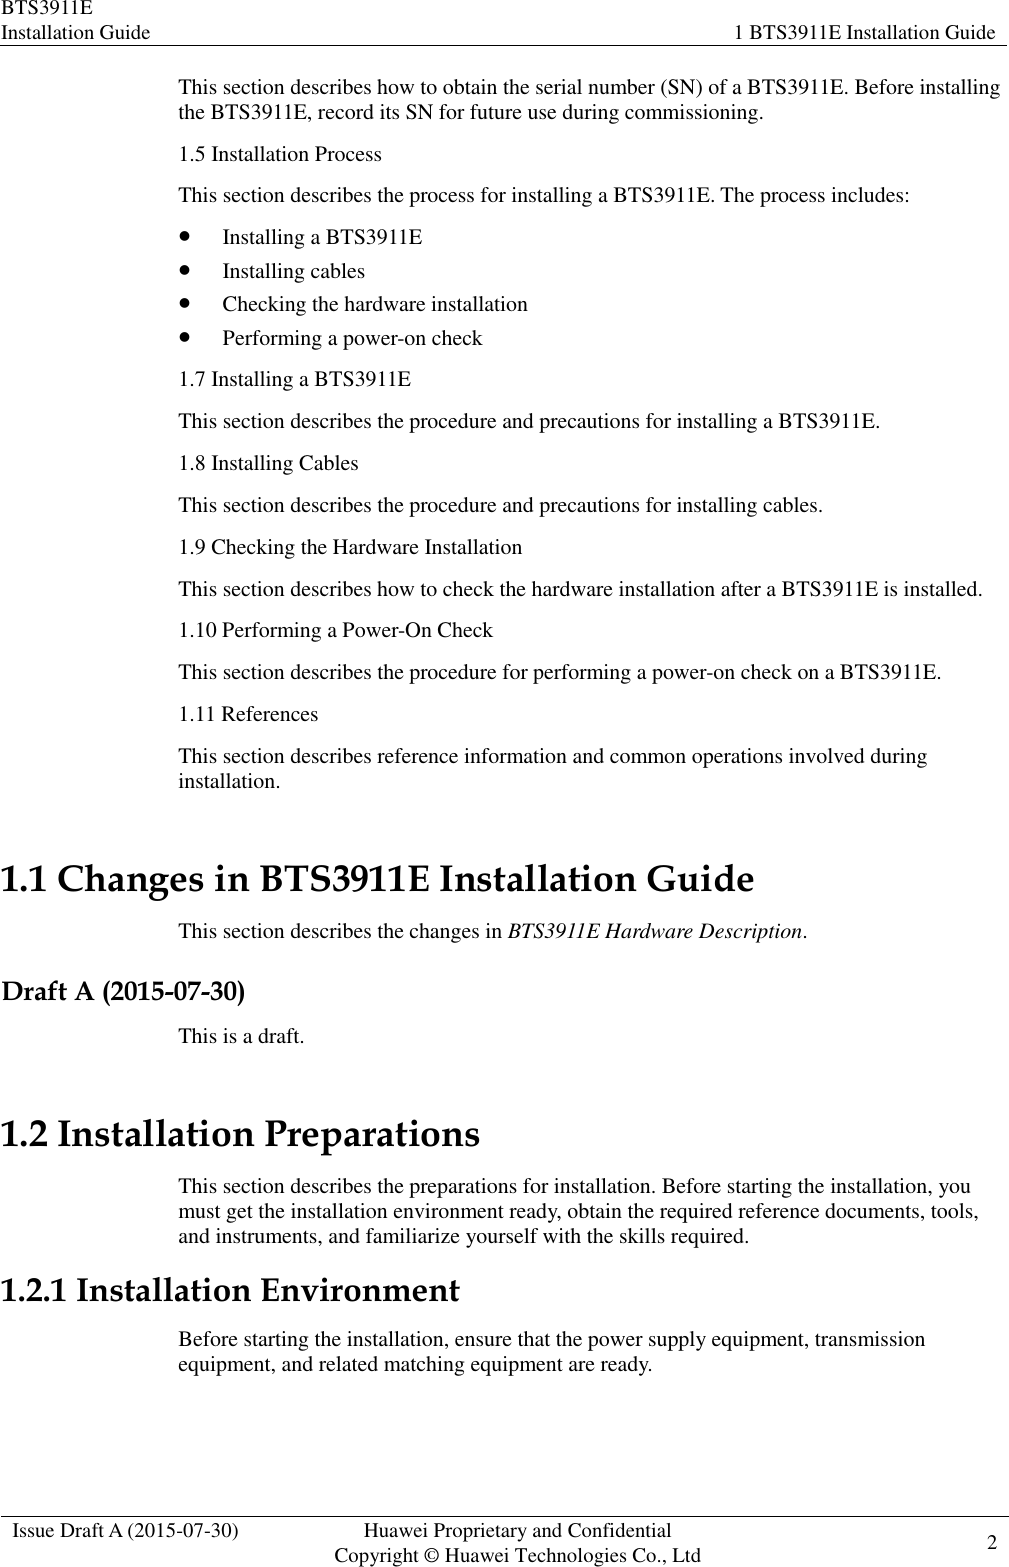 BTS3911E Installation Guide 1 BTS3911E Installation Guide  Issue Draft A (2015-07-30) Huawei Proprietary and Confidential           Copyright © Huawei Technologies Co., Ltd 2    This section describes how to obtain the serial number (SN) of a BTS3911E. Before installing the BTS3911E, record its SN for future use during commissioning. 1.5 Installation Process This section describes the process for installing a BTS3911E. The process includes:  Installing a BTS3911E  Installing cables  Checking the hardware installation  Performing a power-on check 1.7 Installing a BTS3911E This section describes the procedure and precautions for installing a BTS3911E. 1.8 Installing Cables This section describes the procedure and precautions for installing cables. 1.9 Checking the Hardware Installation This section describes how to check the hardware installation after a BTS3911E is installed. 1.10 Performing a Power-On Check This section describes the procedure for performing a power-on check on a BTS3911E. 1.11 References This section describes reference information and common operations involved during installation. 1.1 Changes in BTS3911E Installation Guide This section describes the changes in BTS3911E Hardware Description. Draft A (2015-07-30) This is a draft. 1.2 Installation Preparations This section describes the preparations for installation. Before starting the installation, you must get the installation environment ready, obtain the required reference documents, tools, and instruments, and familiarize yourself with the skills required.   1.2.1 Installation Environment Before starting the installation, ensure that the power supply equipment, transmission equipment, and related matching equipment are ready. 